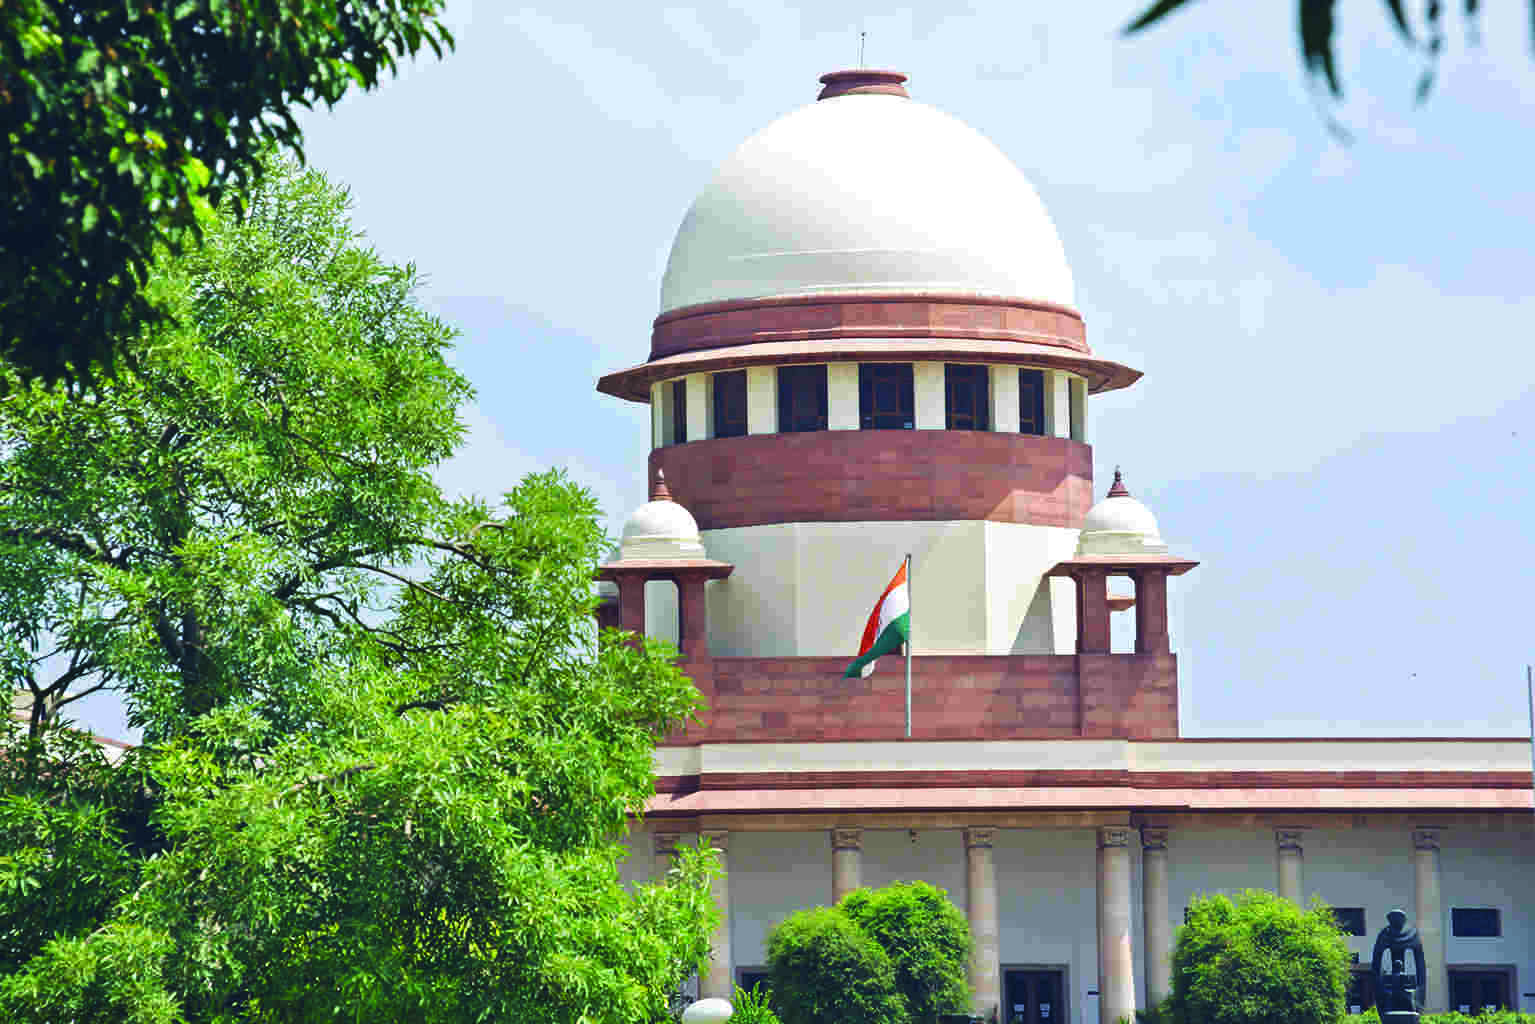 The underbelly of the impenetrable Indian Supreme Court